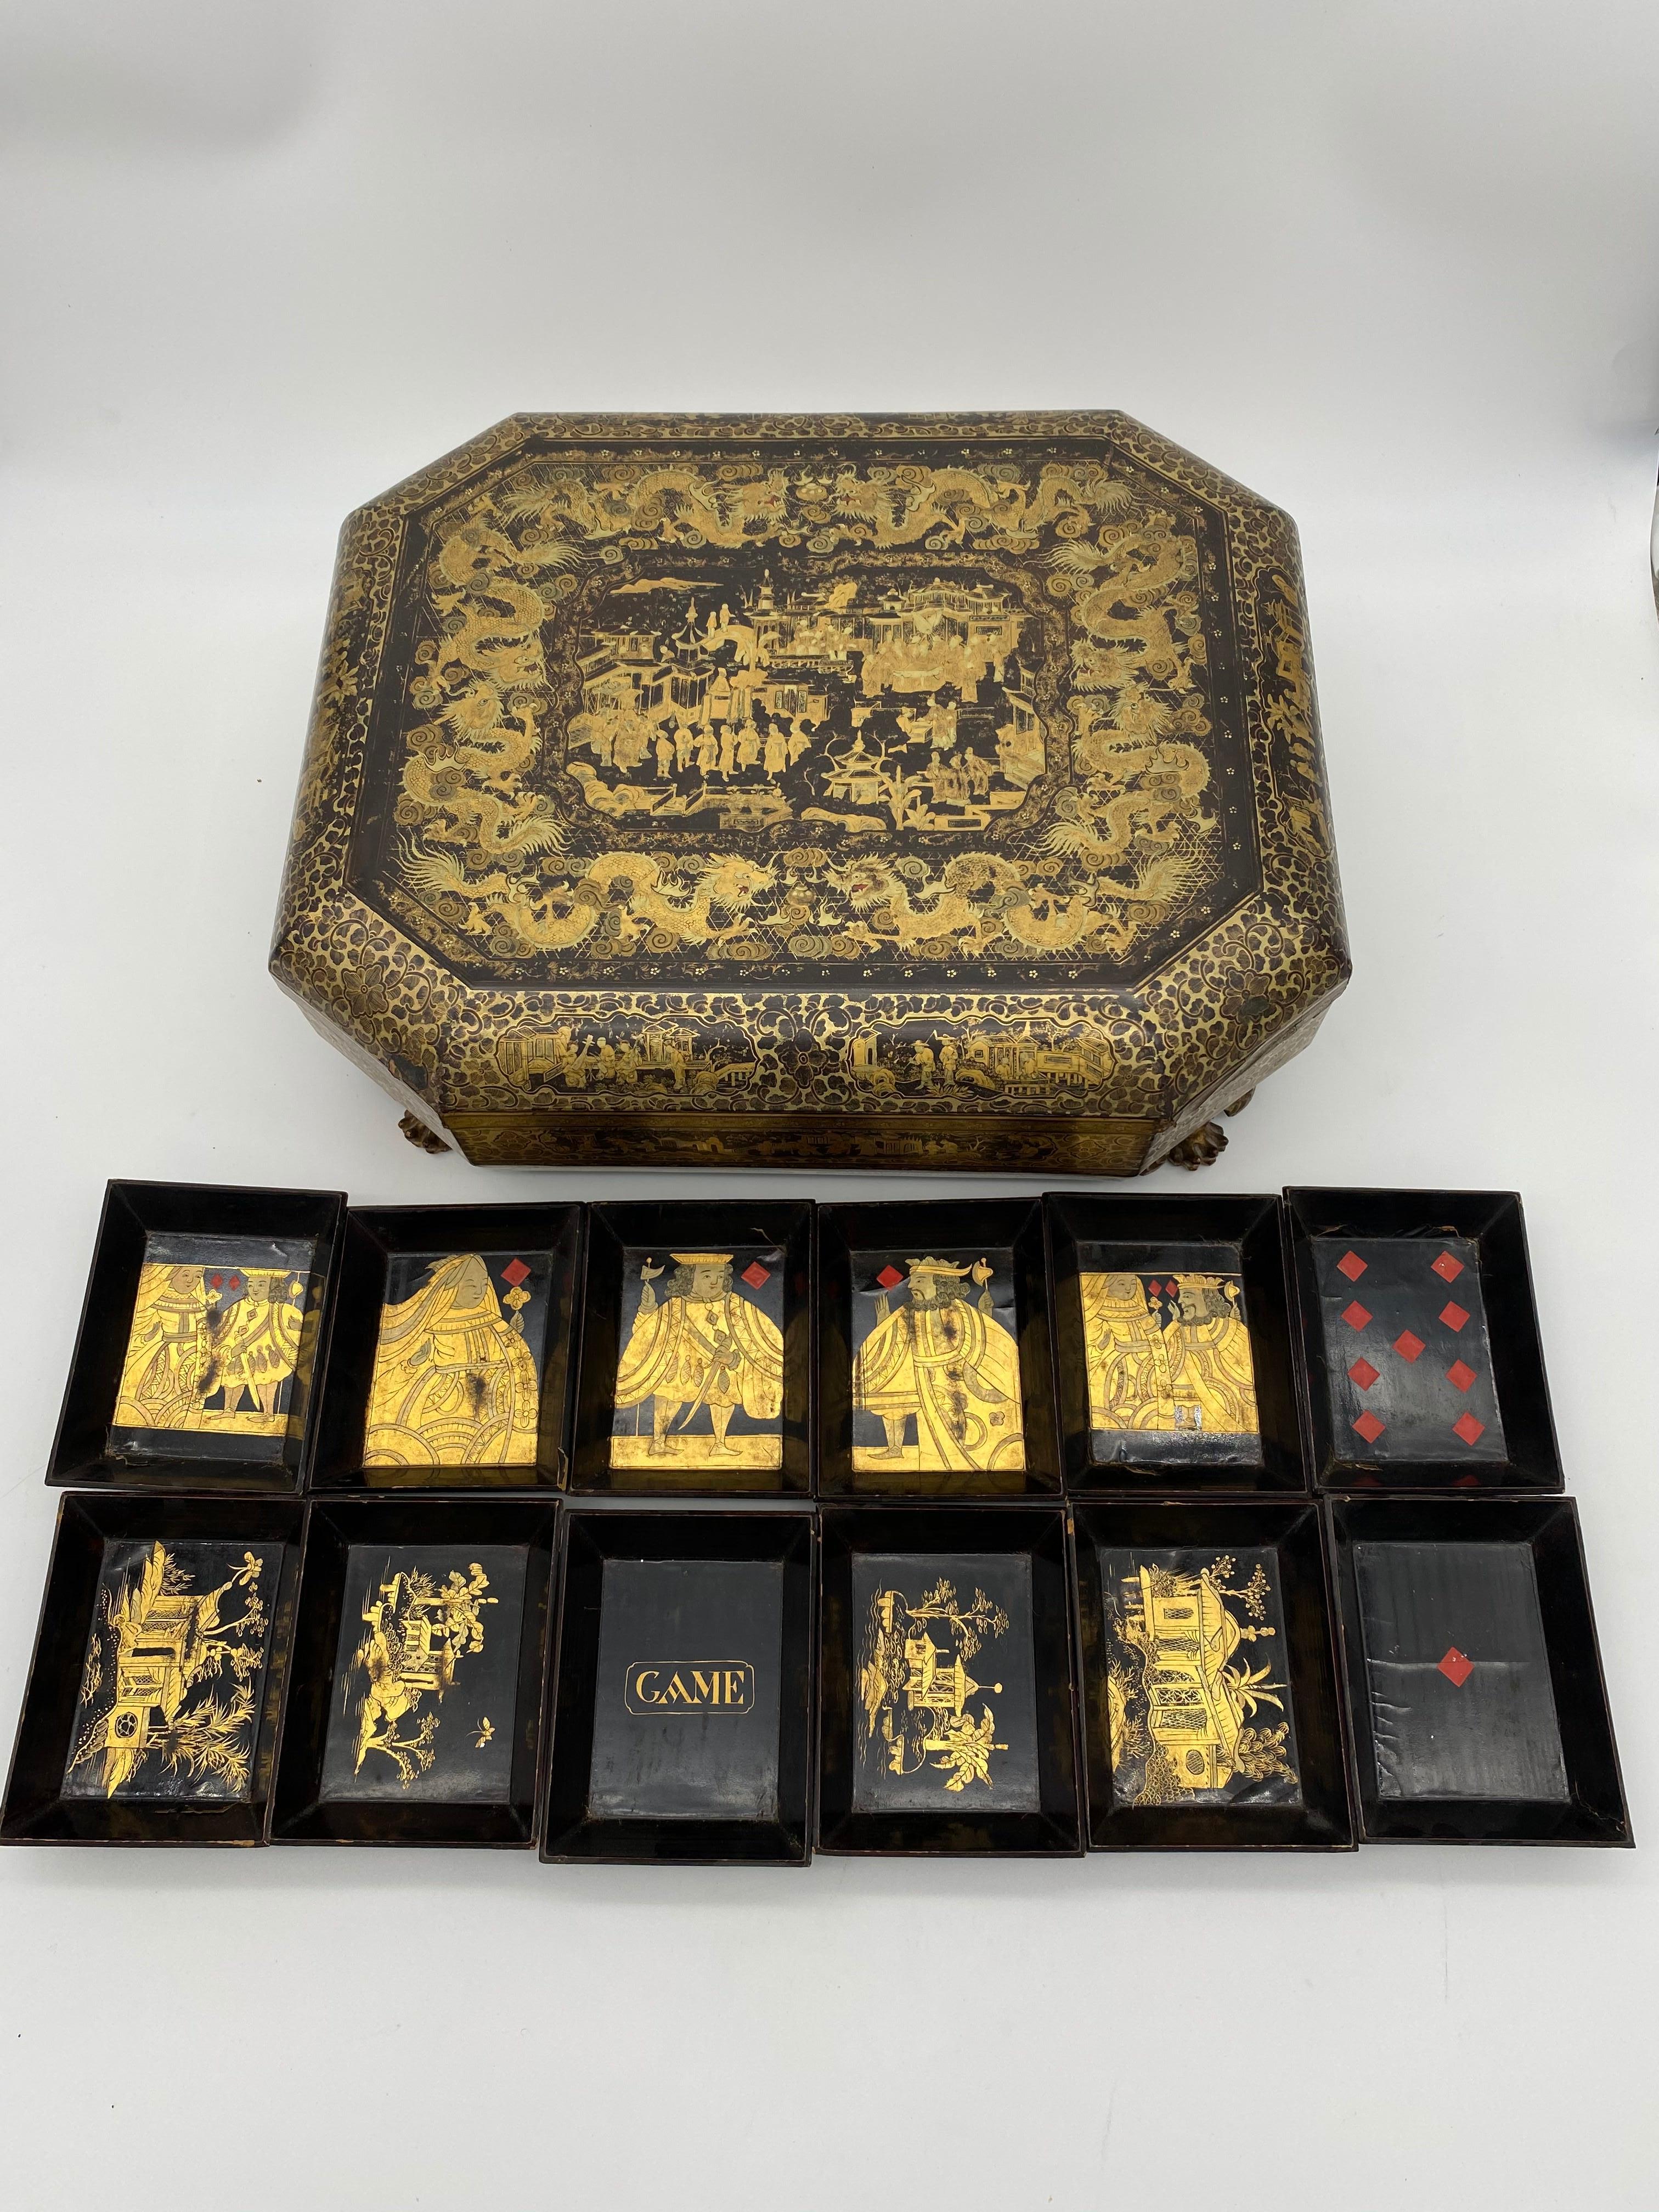 Antique 19th Century Export Chinese Lacquer Gaming Box In Good Condition For Sale In Brea, CA